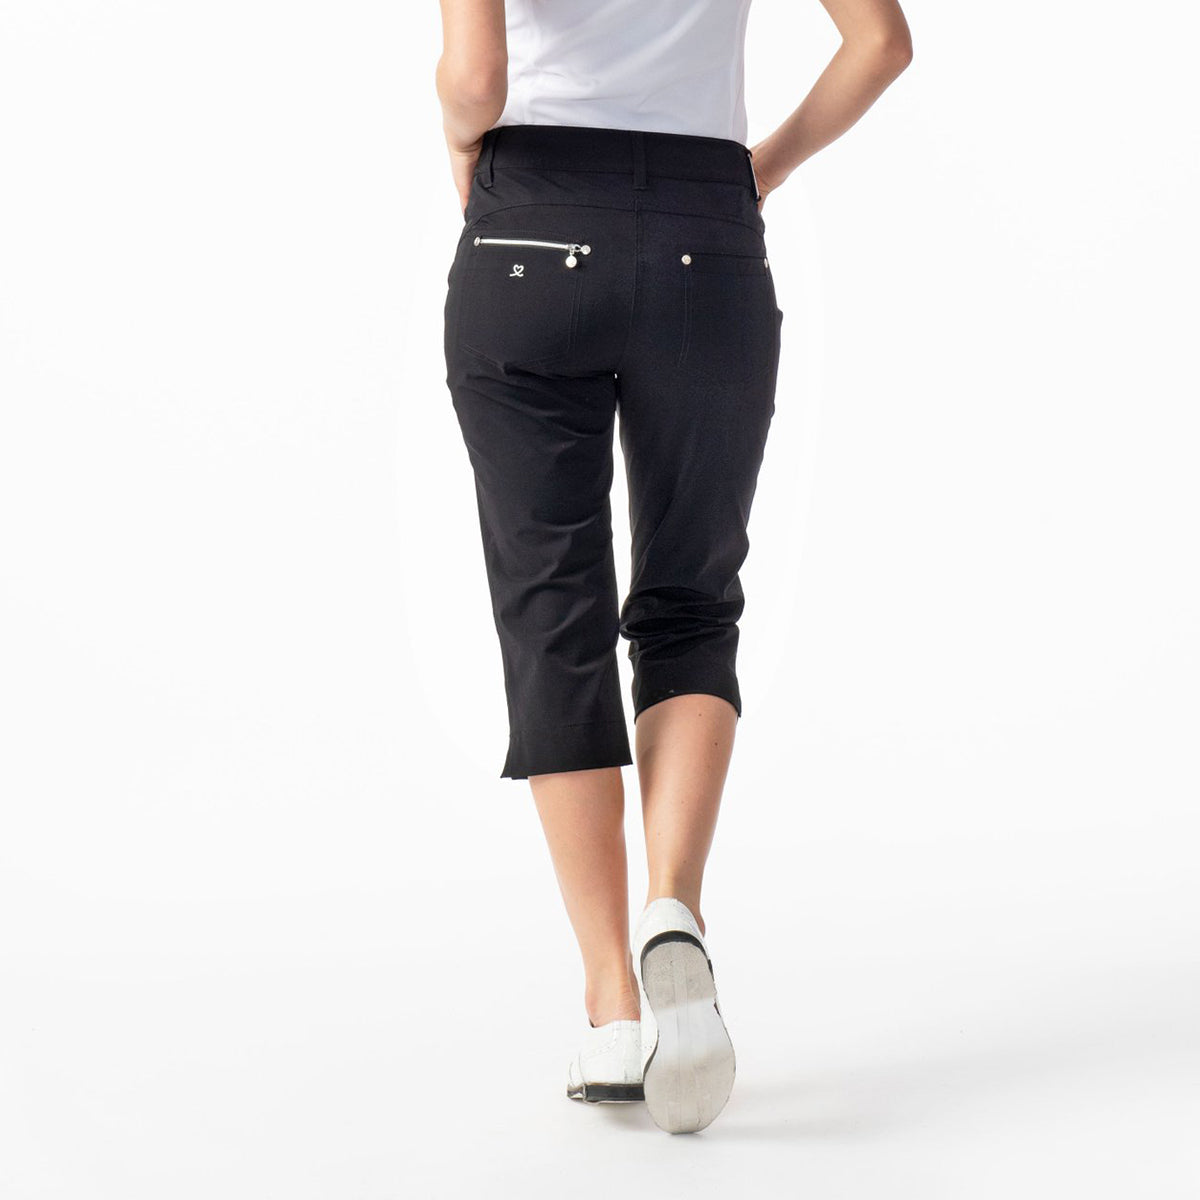 Daily Sports Ladies Pro-Stretch Capris with Straight Leg Fit in Black